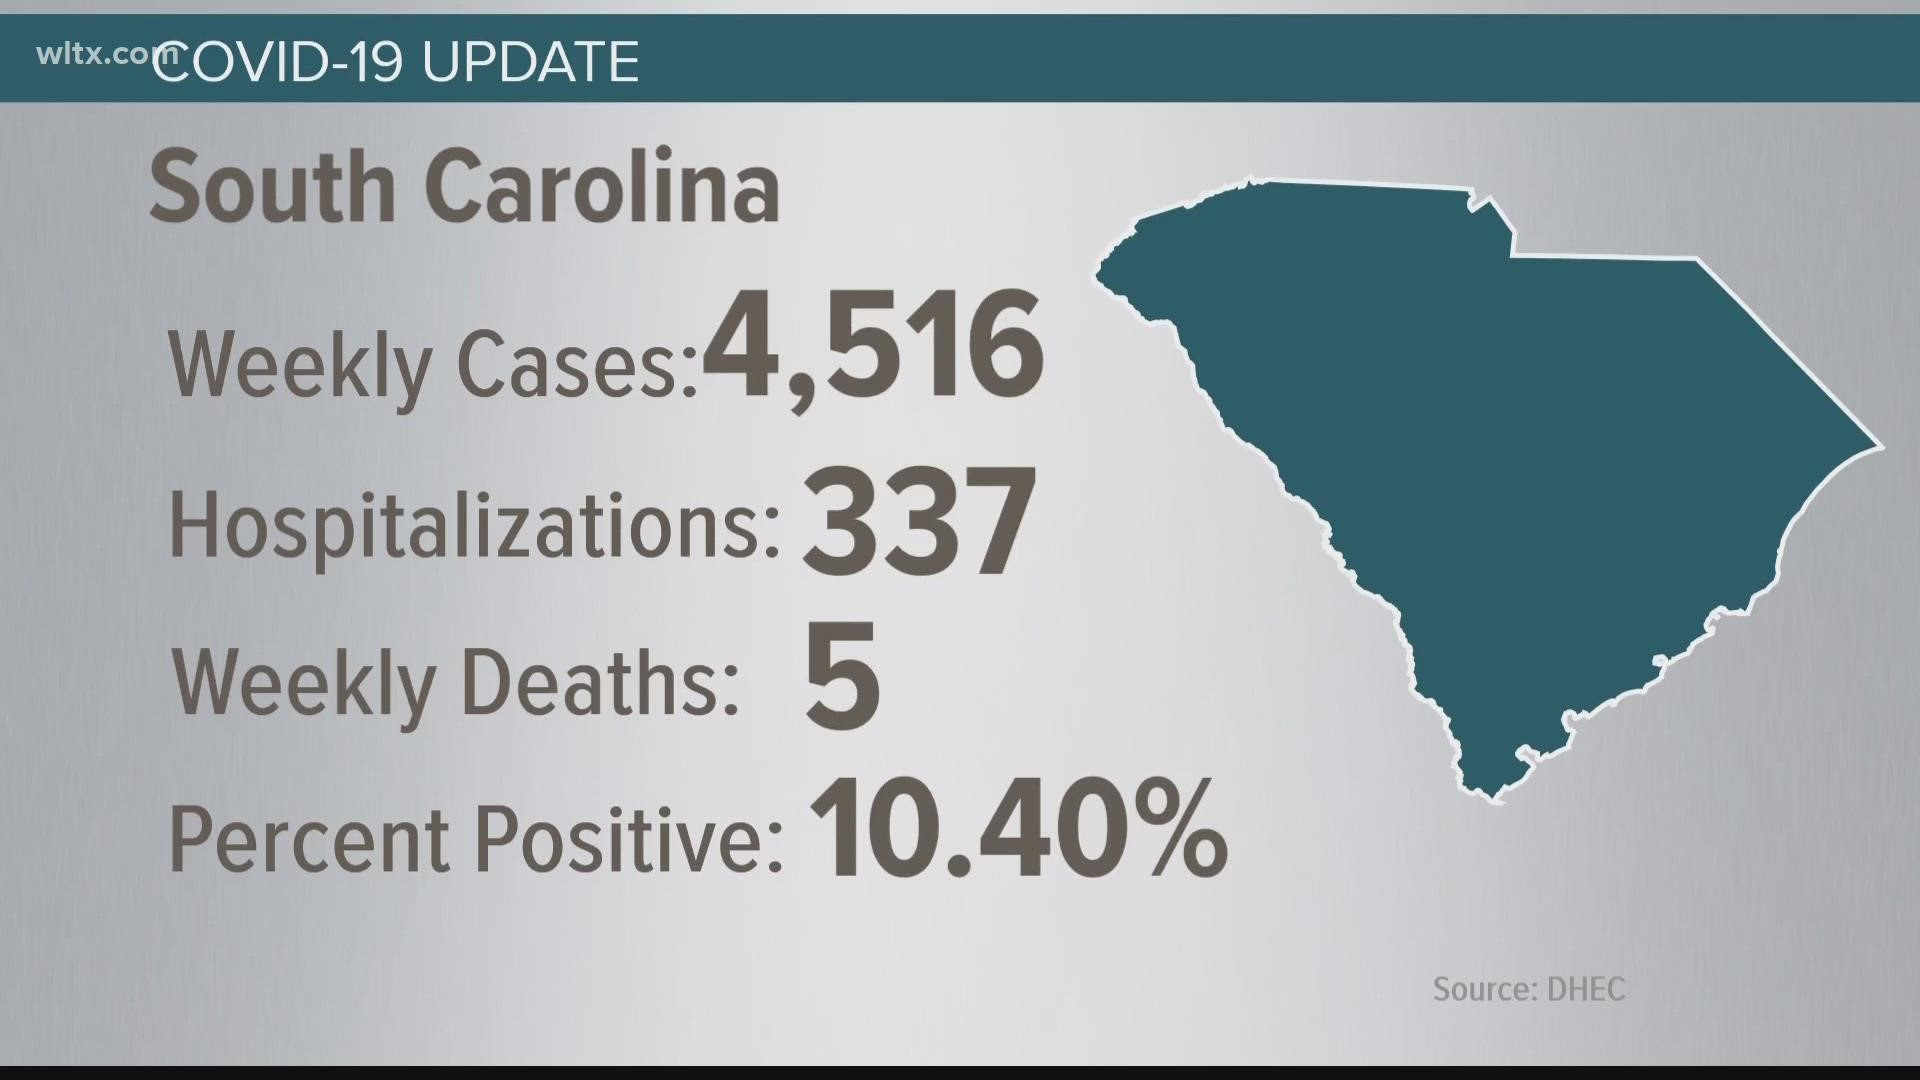 The COVID numbers in South Carolina continue to go down.